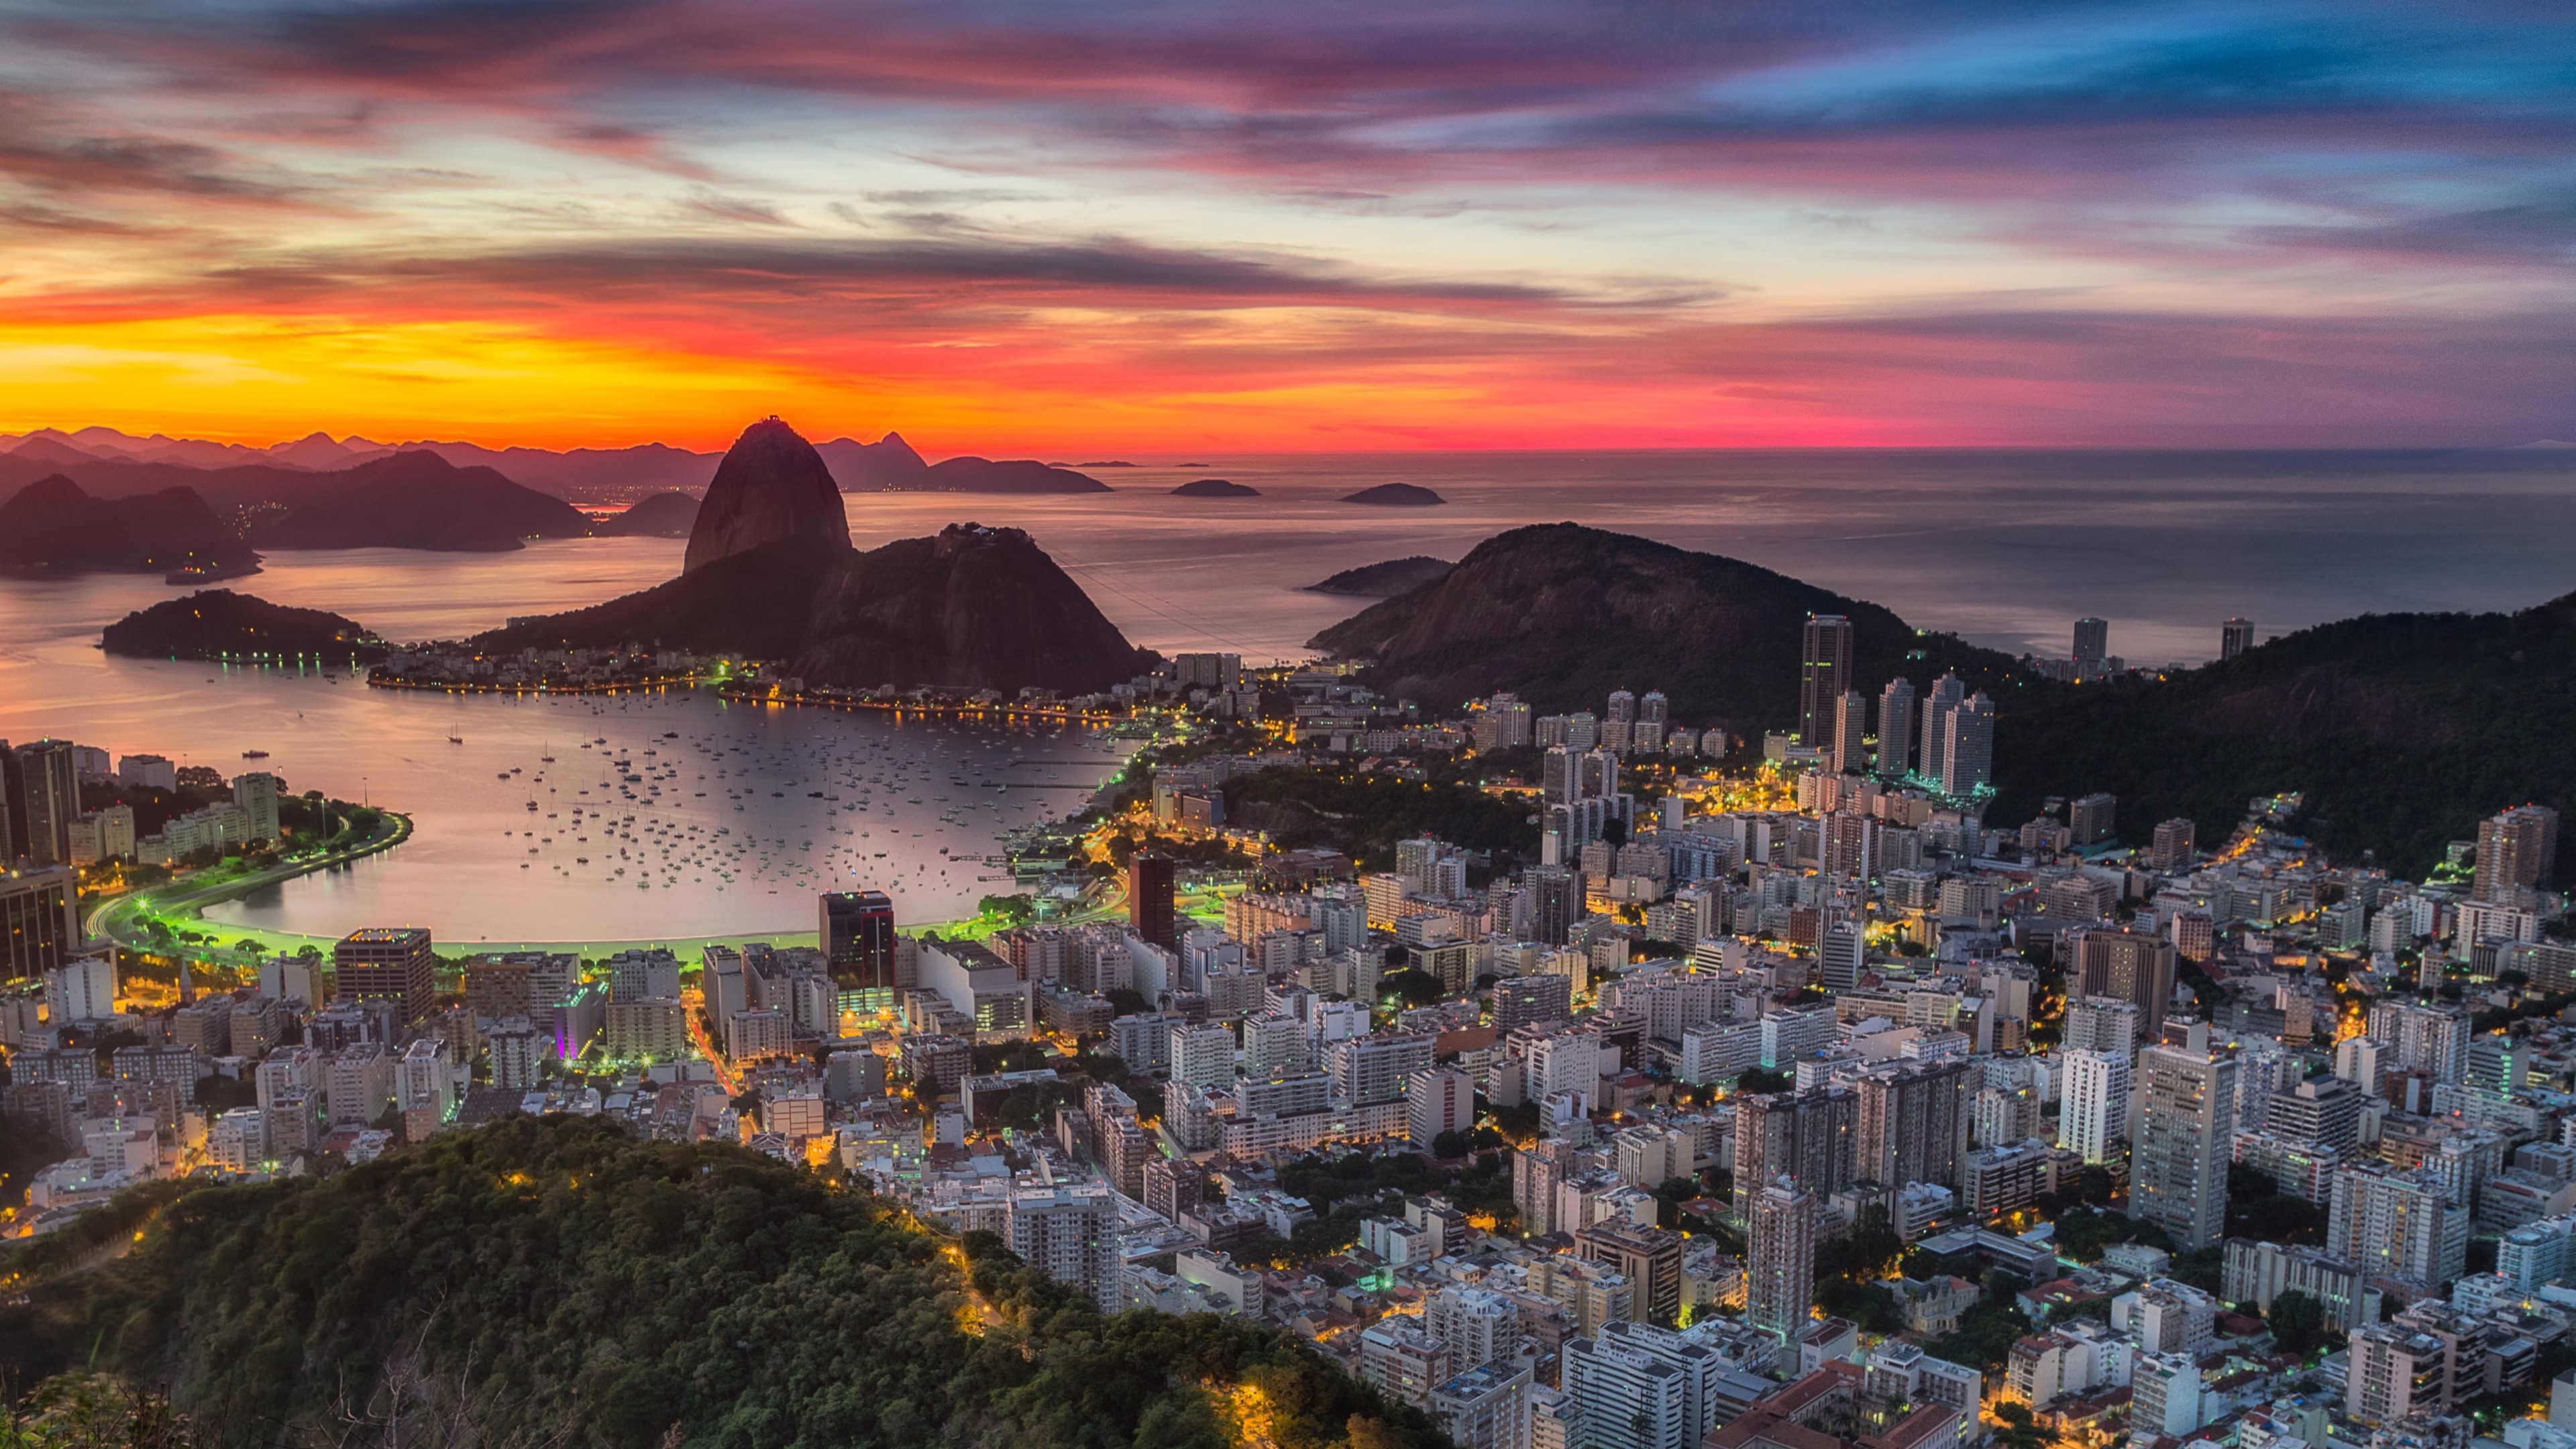 Rio De Janeiro Guanabara Bay Brazil South America Sunset Twilight Panoramic  View 4k Ultra Hd Desktop Wallpapers For Computers Laptop Tablet And Mobile  Phones : 